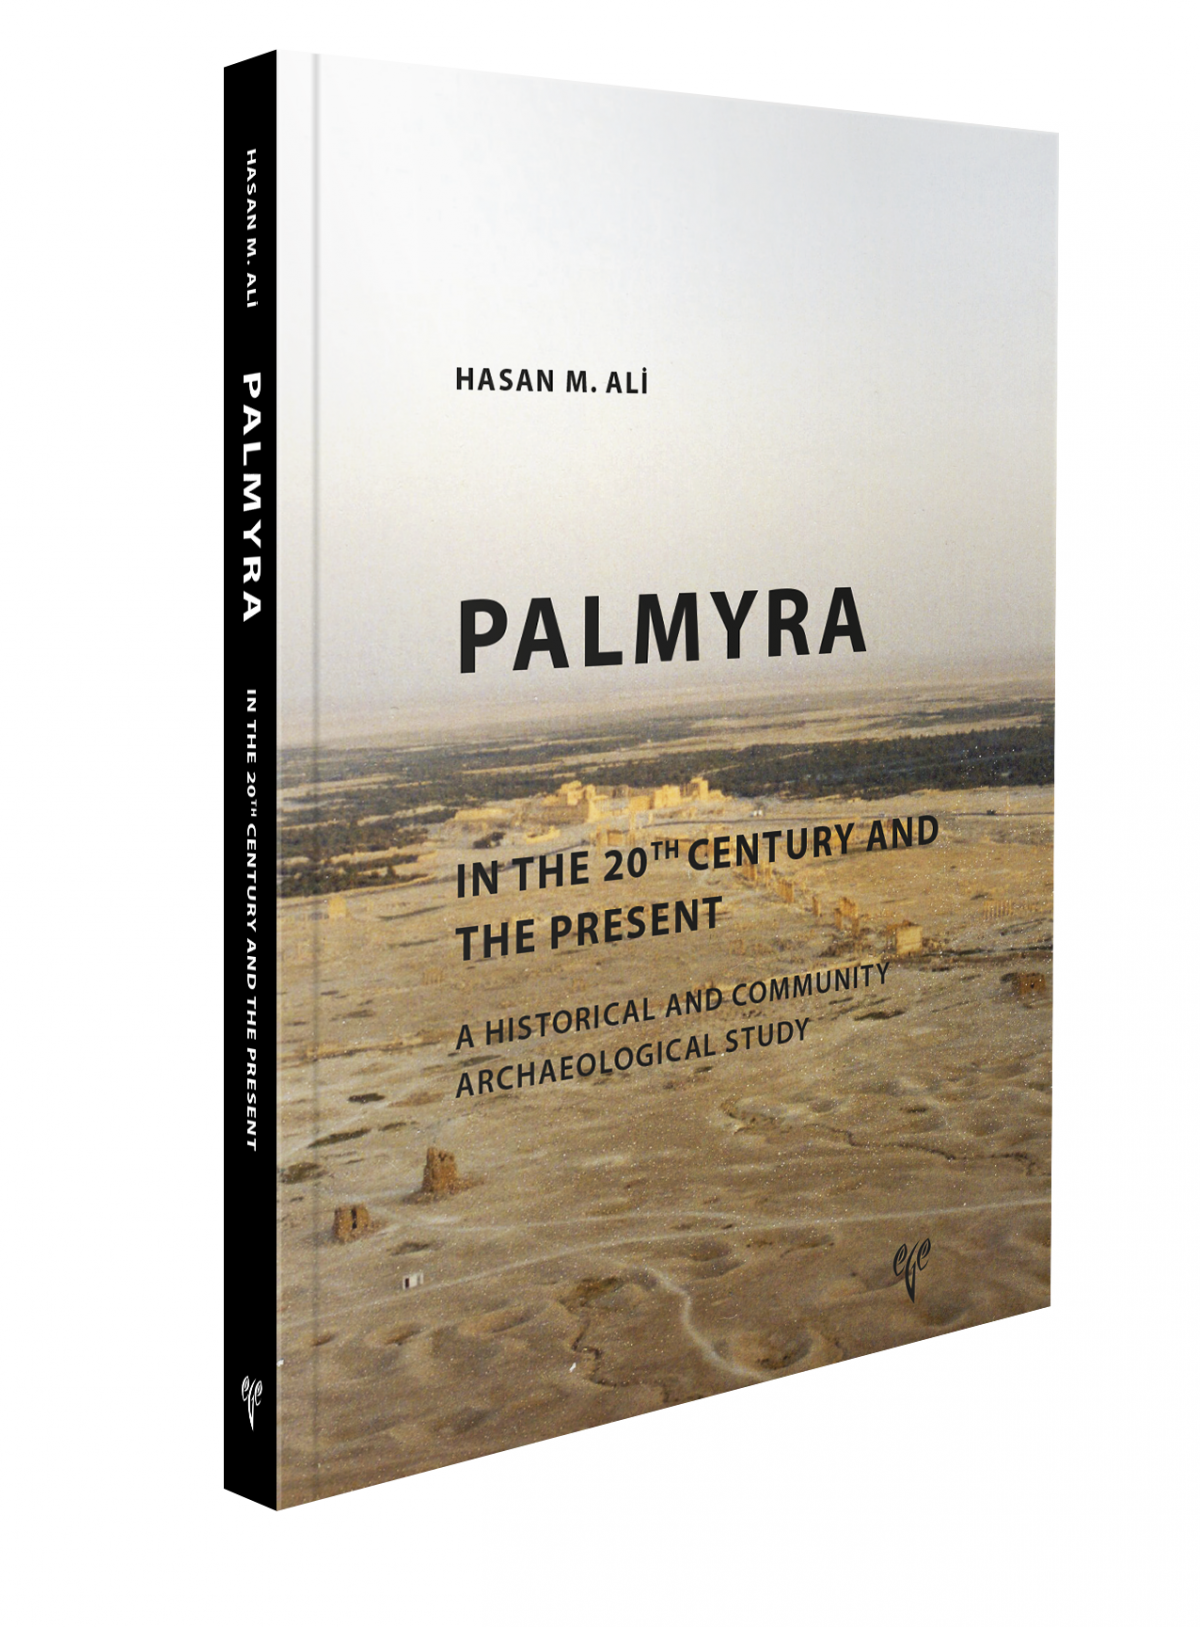 Palmyra. In the 20th Century and the Present. A historical and Community Archaeological Study